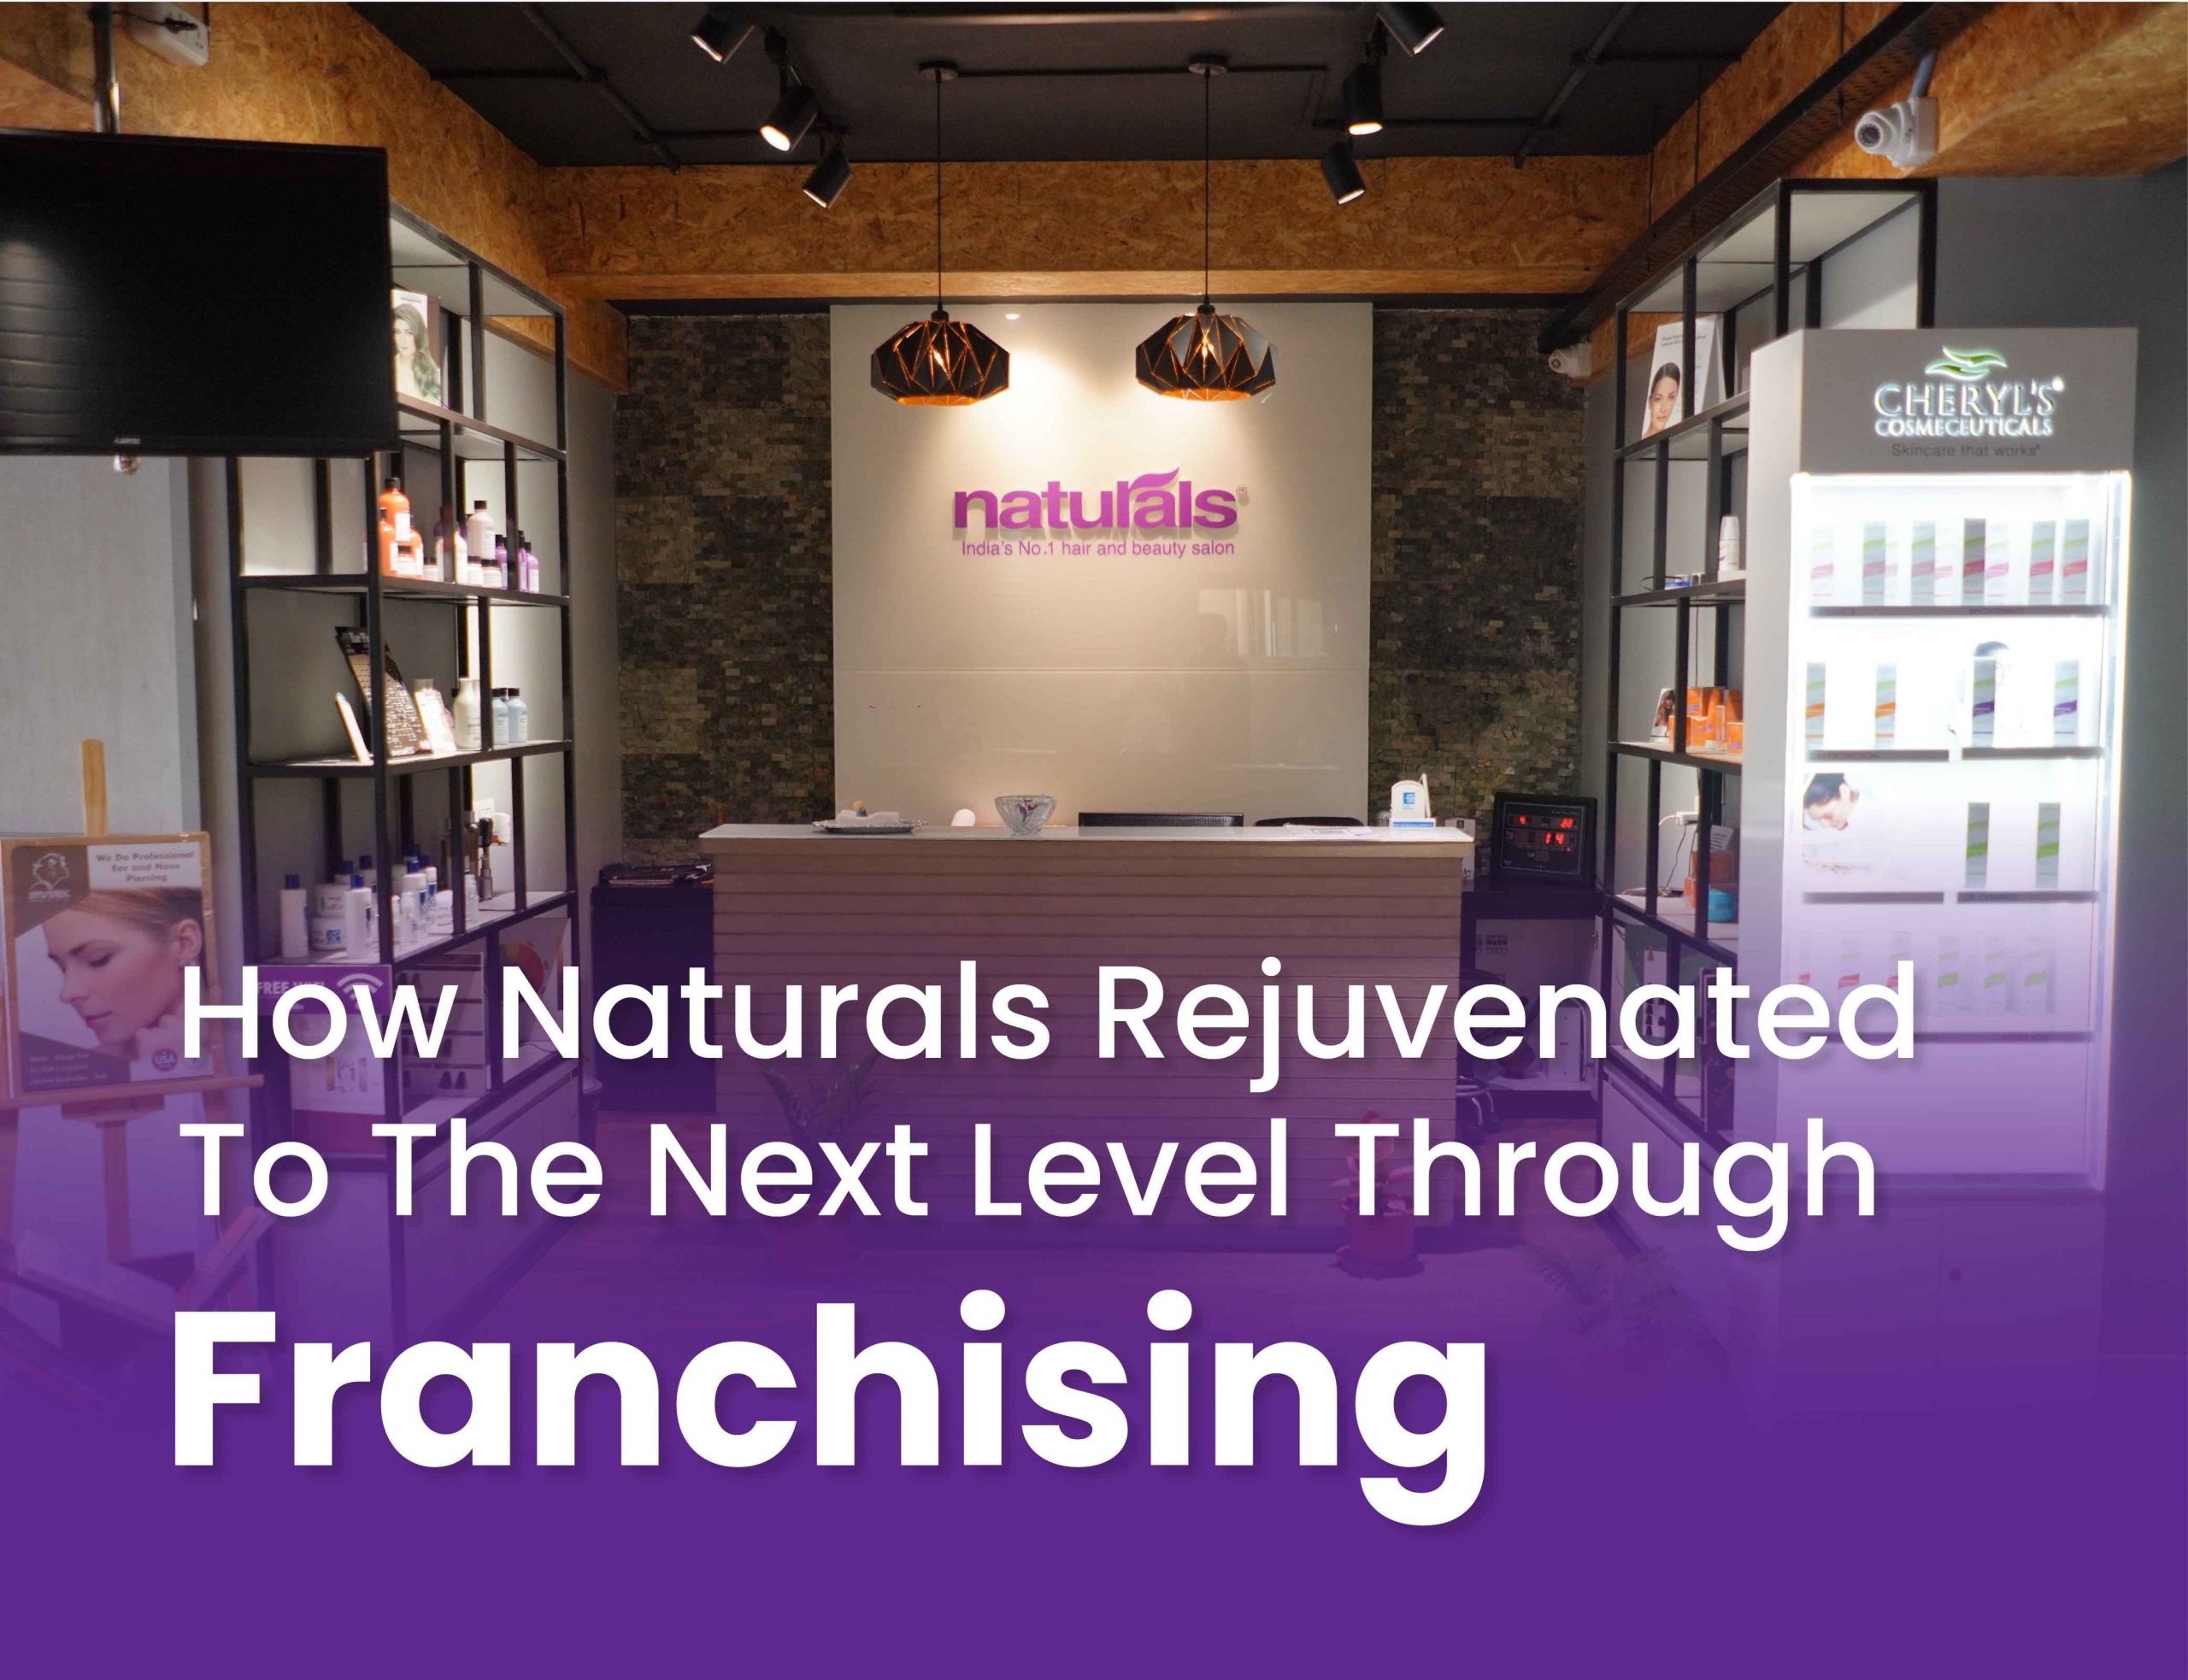 How Naturals Rejuvenated to the Next-Level through Franchising?